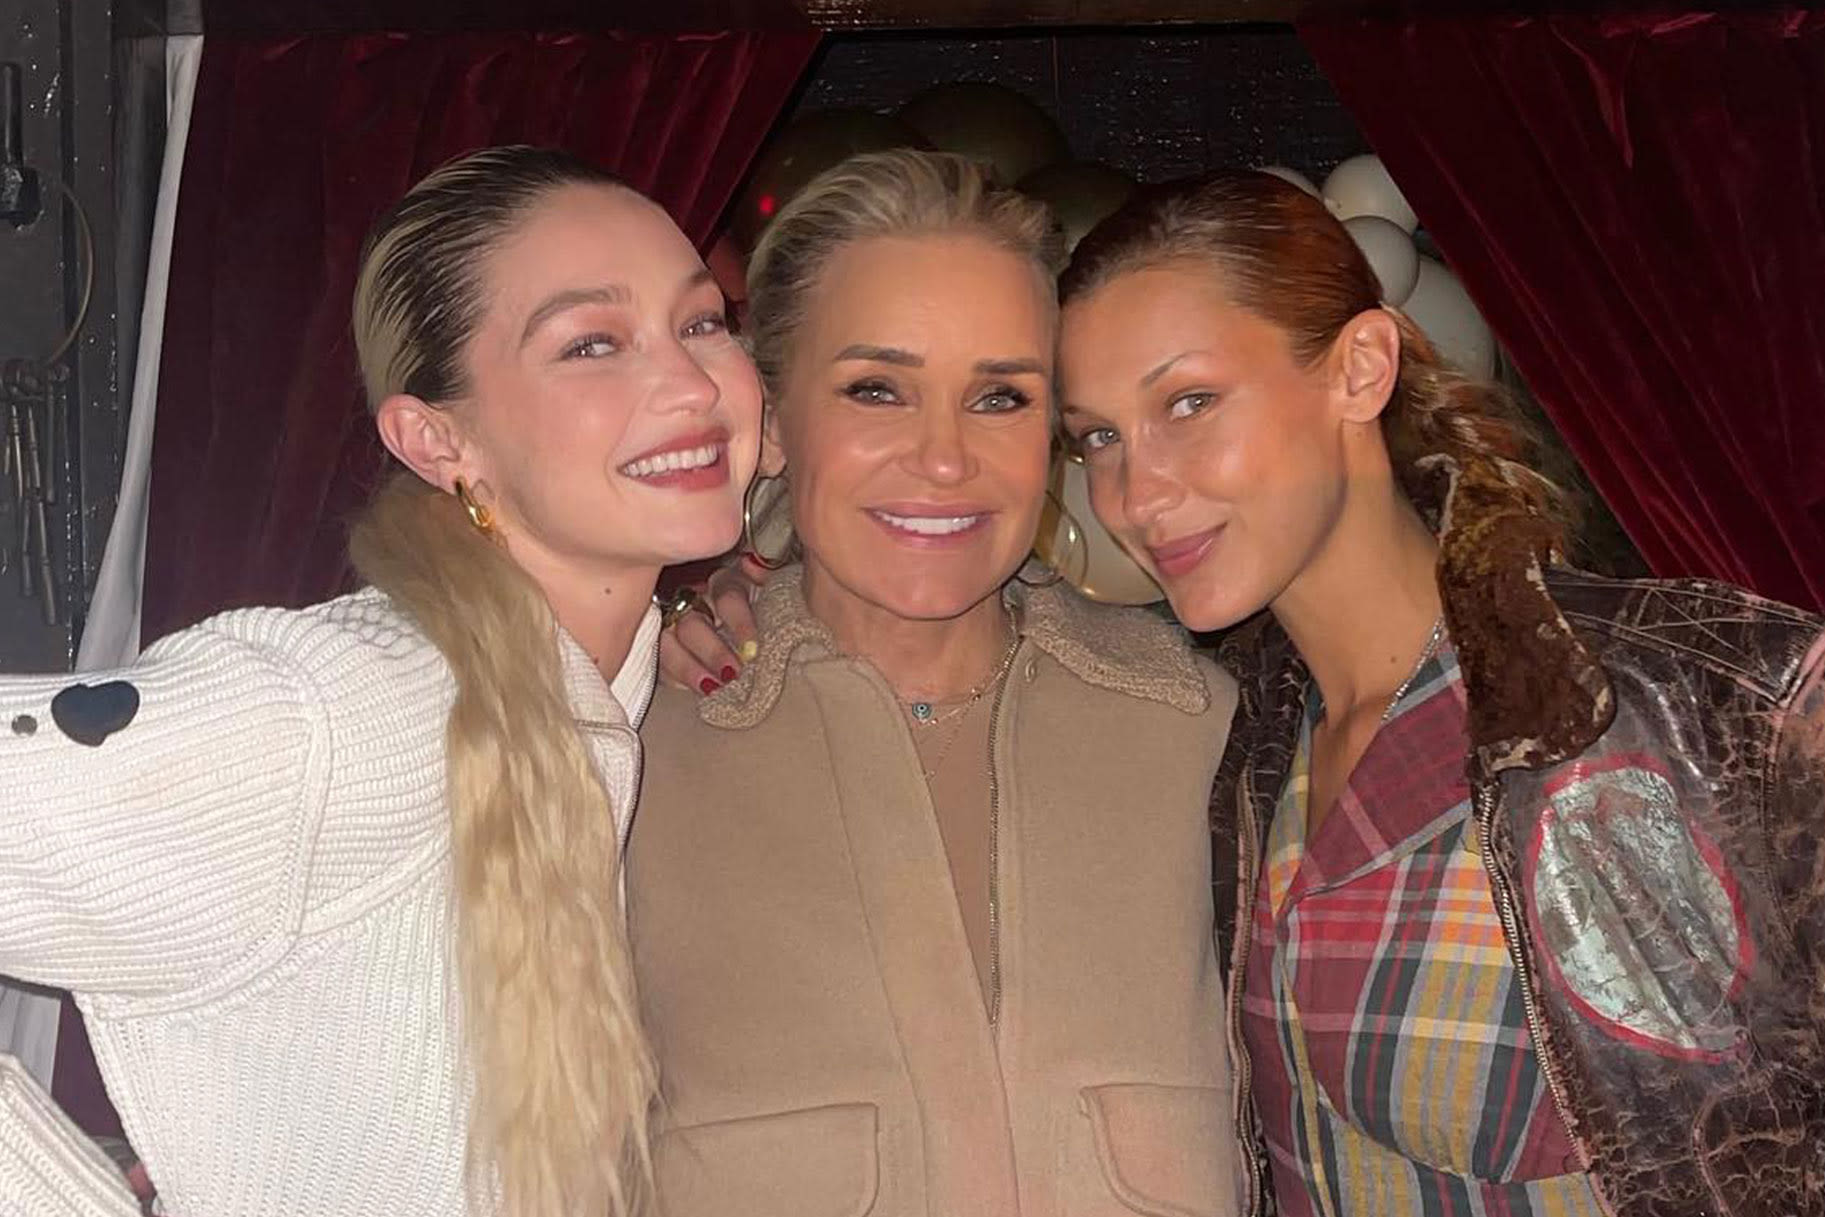 Yolanda Hadid is Officially Modeling Again and Gigi Thinks It’s “Major” | Bravo TV Official Site